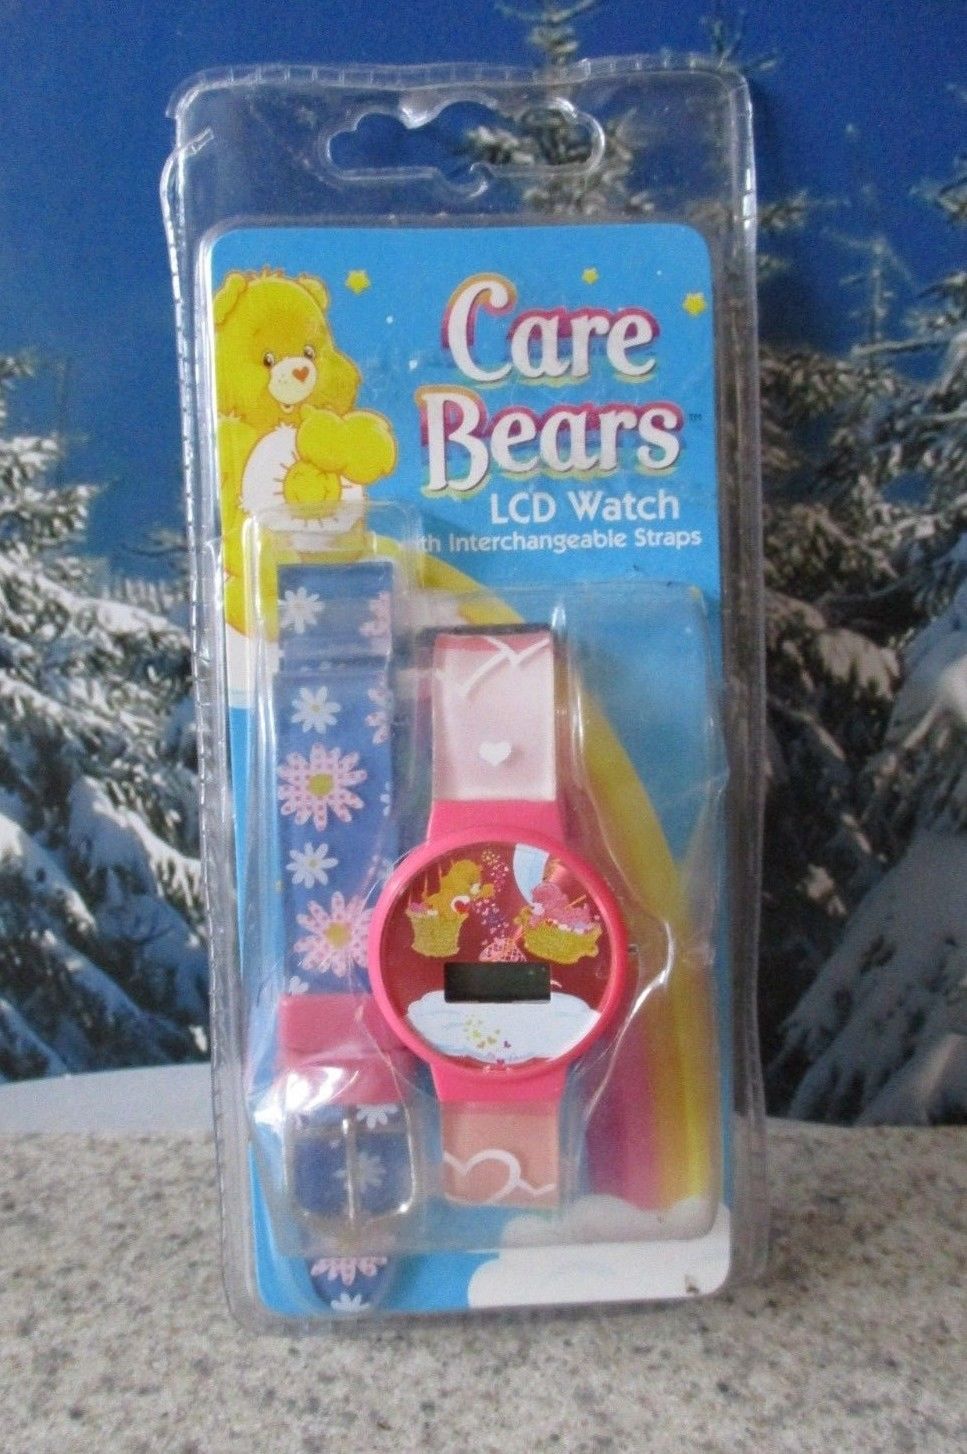 Care Bear 2004 LCD Kids Watch Pink in Package Interchangeable straps 